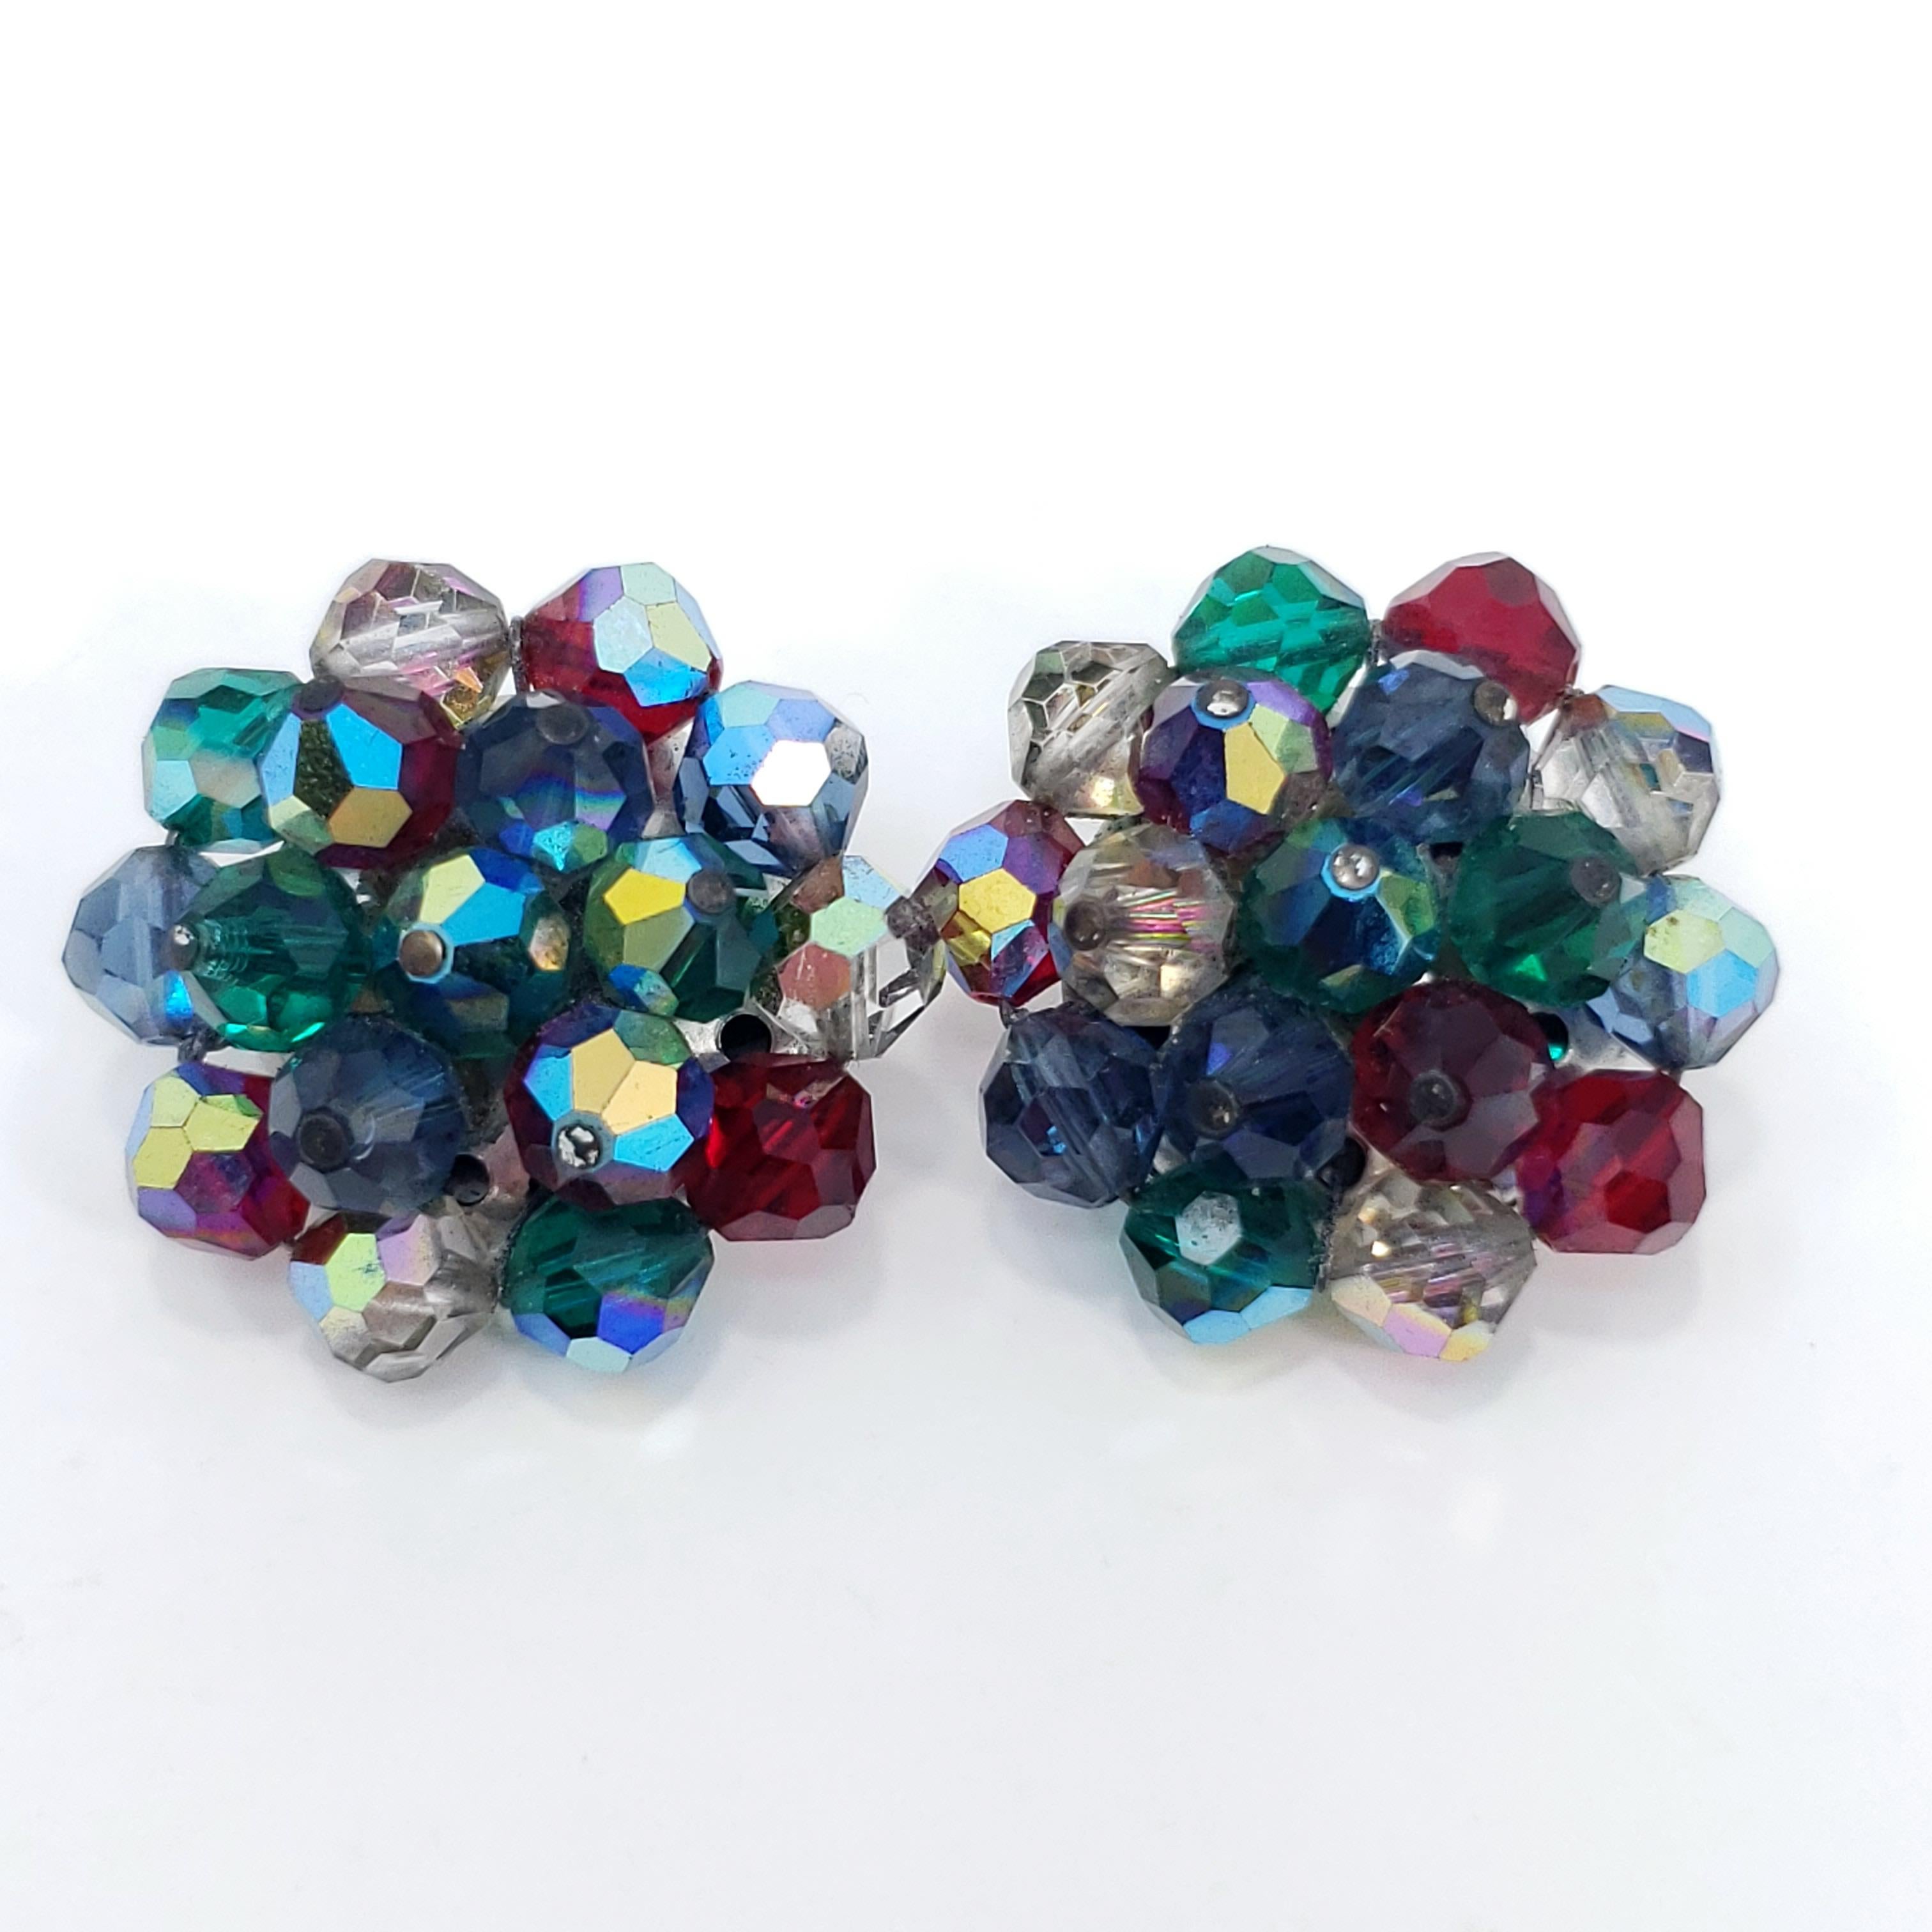 A touch of retro flair! These Laguna silver clip on earrings are decorated with glamorous aurora borealis crystals in emerald, ruby, and clear colors.

Circa 1950s. Made by New York-based fashion jewelry designer Laguna, founded in the 1940s.